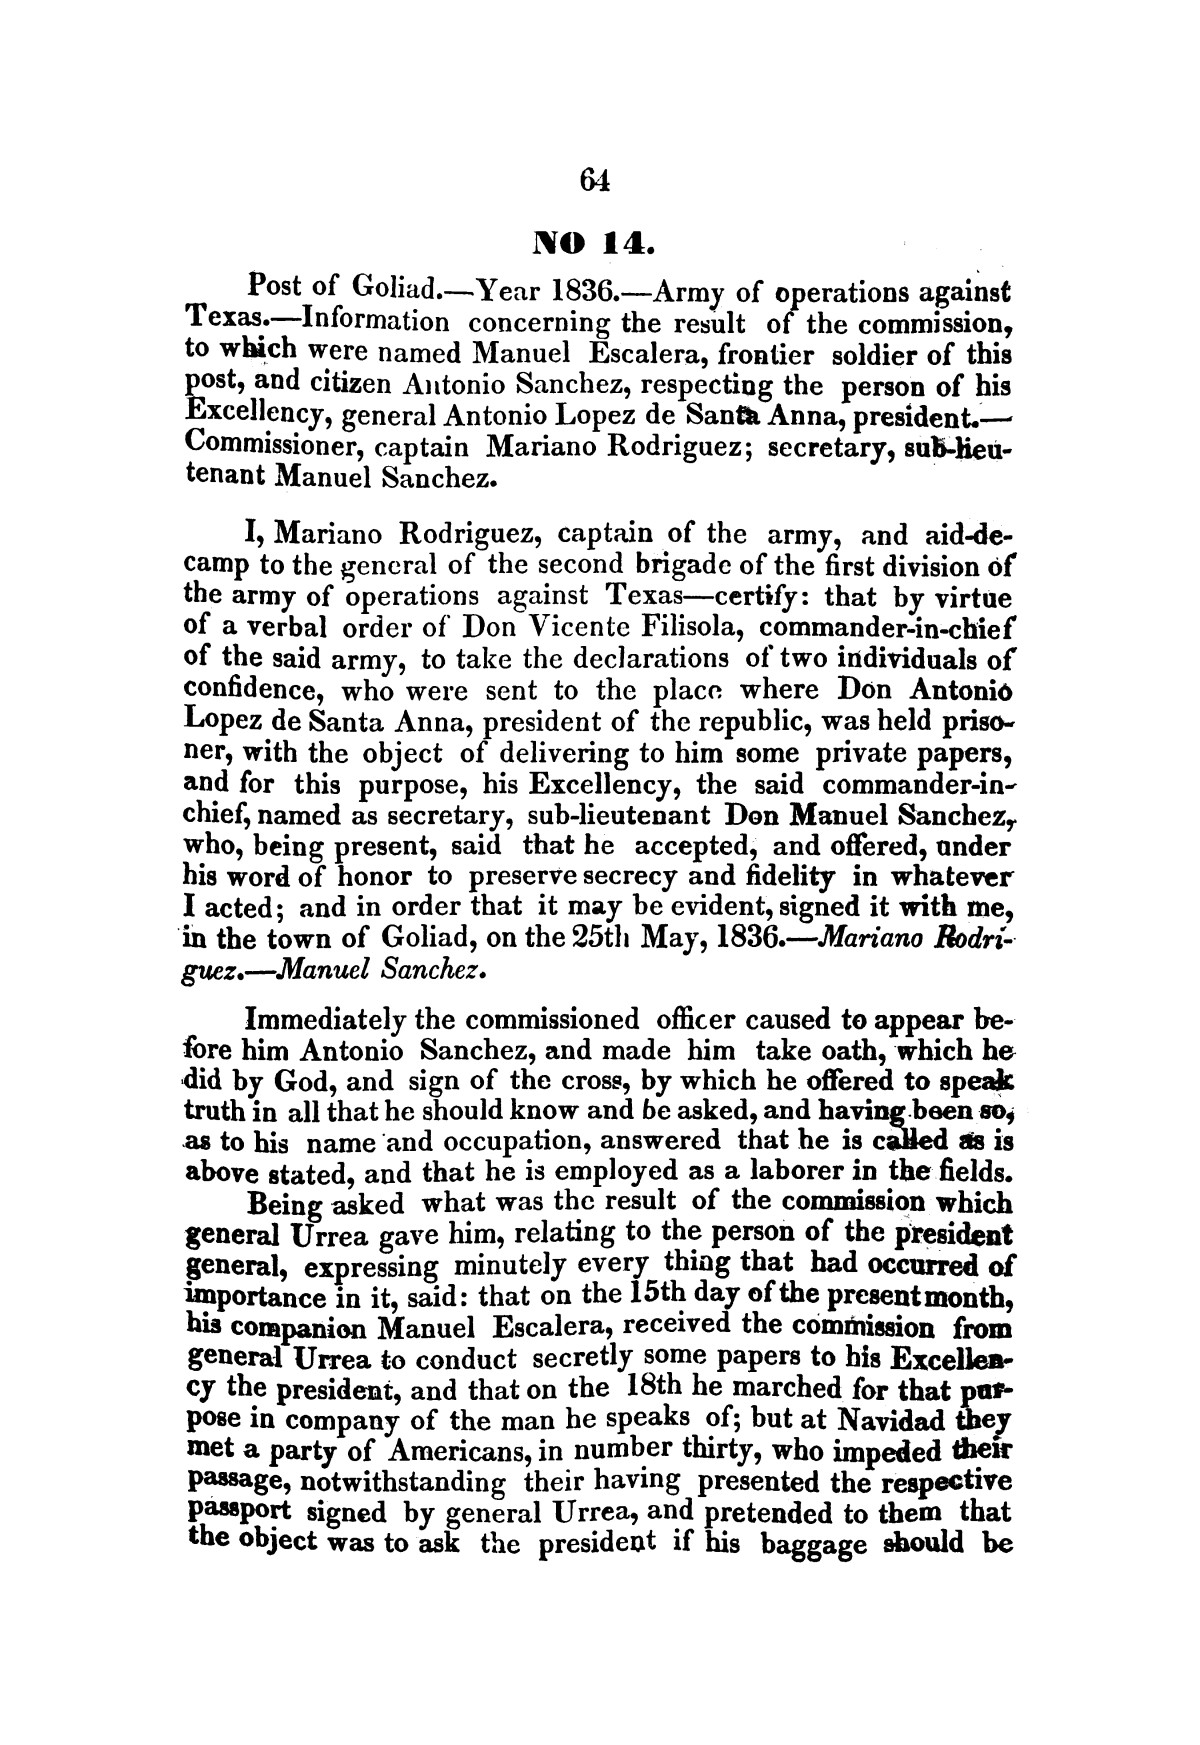 Evacuation of Texas : translation of the Representation addressed to the supreme government / by Vicente Filisola, in defence of his honor, and explanation of his operations as commander-in-chief of the army against Texas.
                                                
                                                    [Sequence #]: 67 of 72
                                                